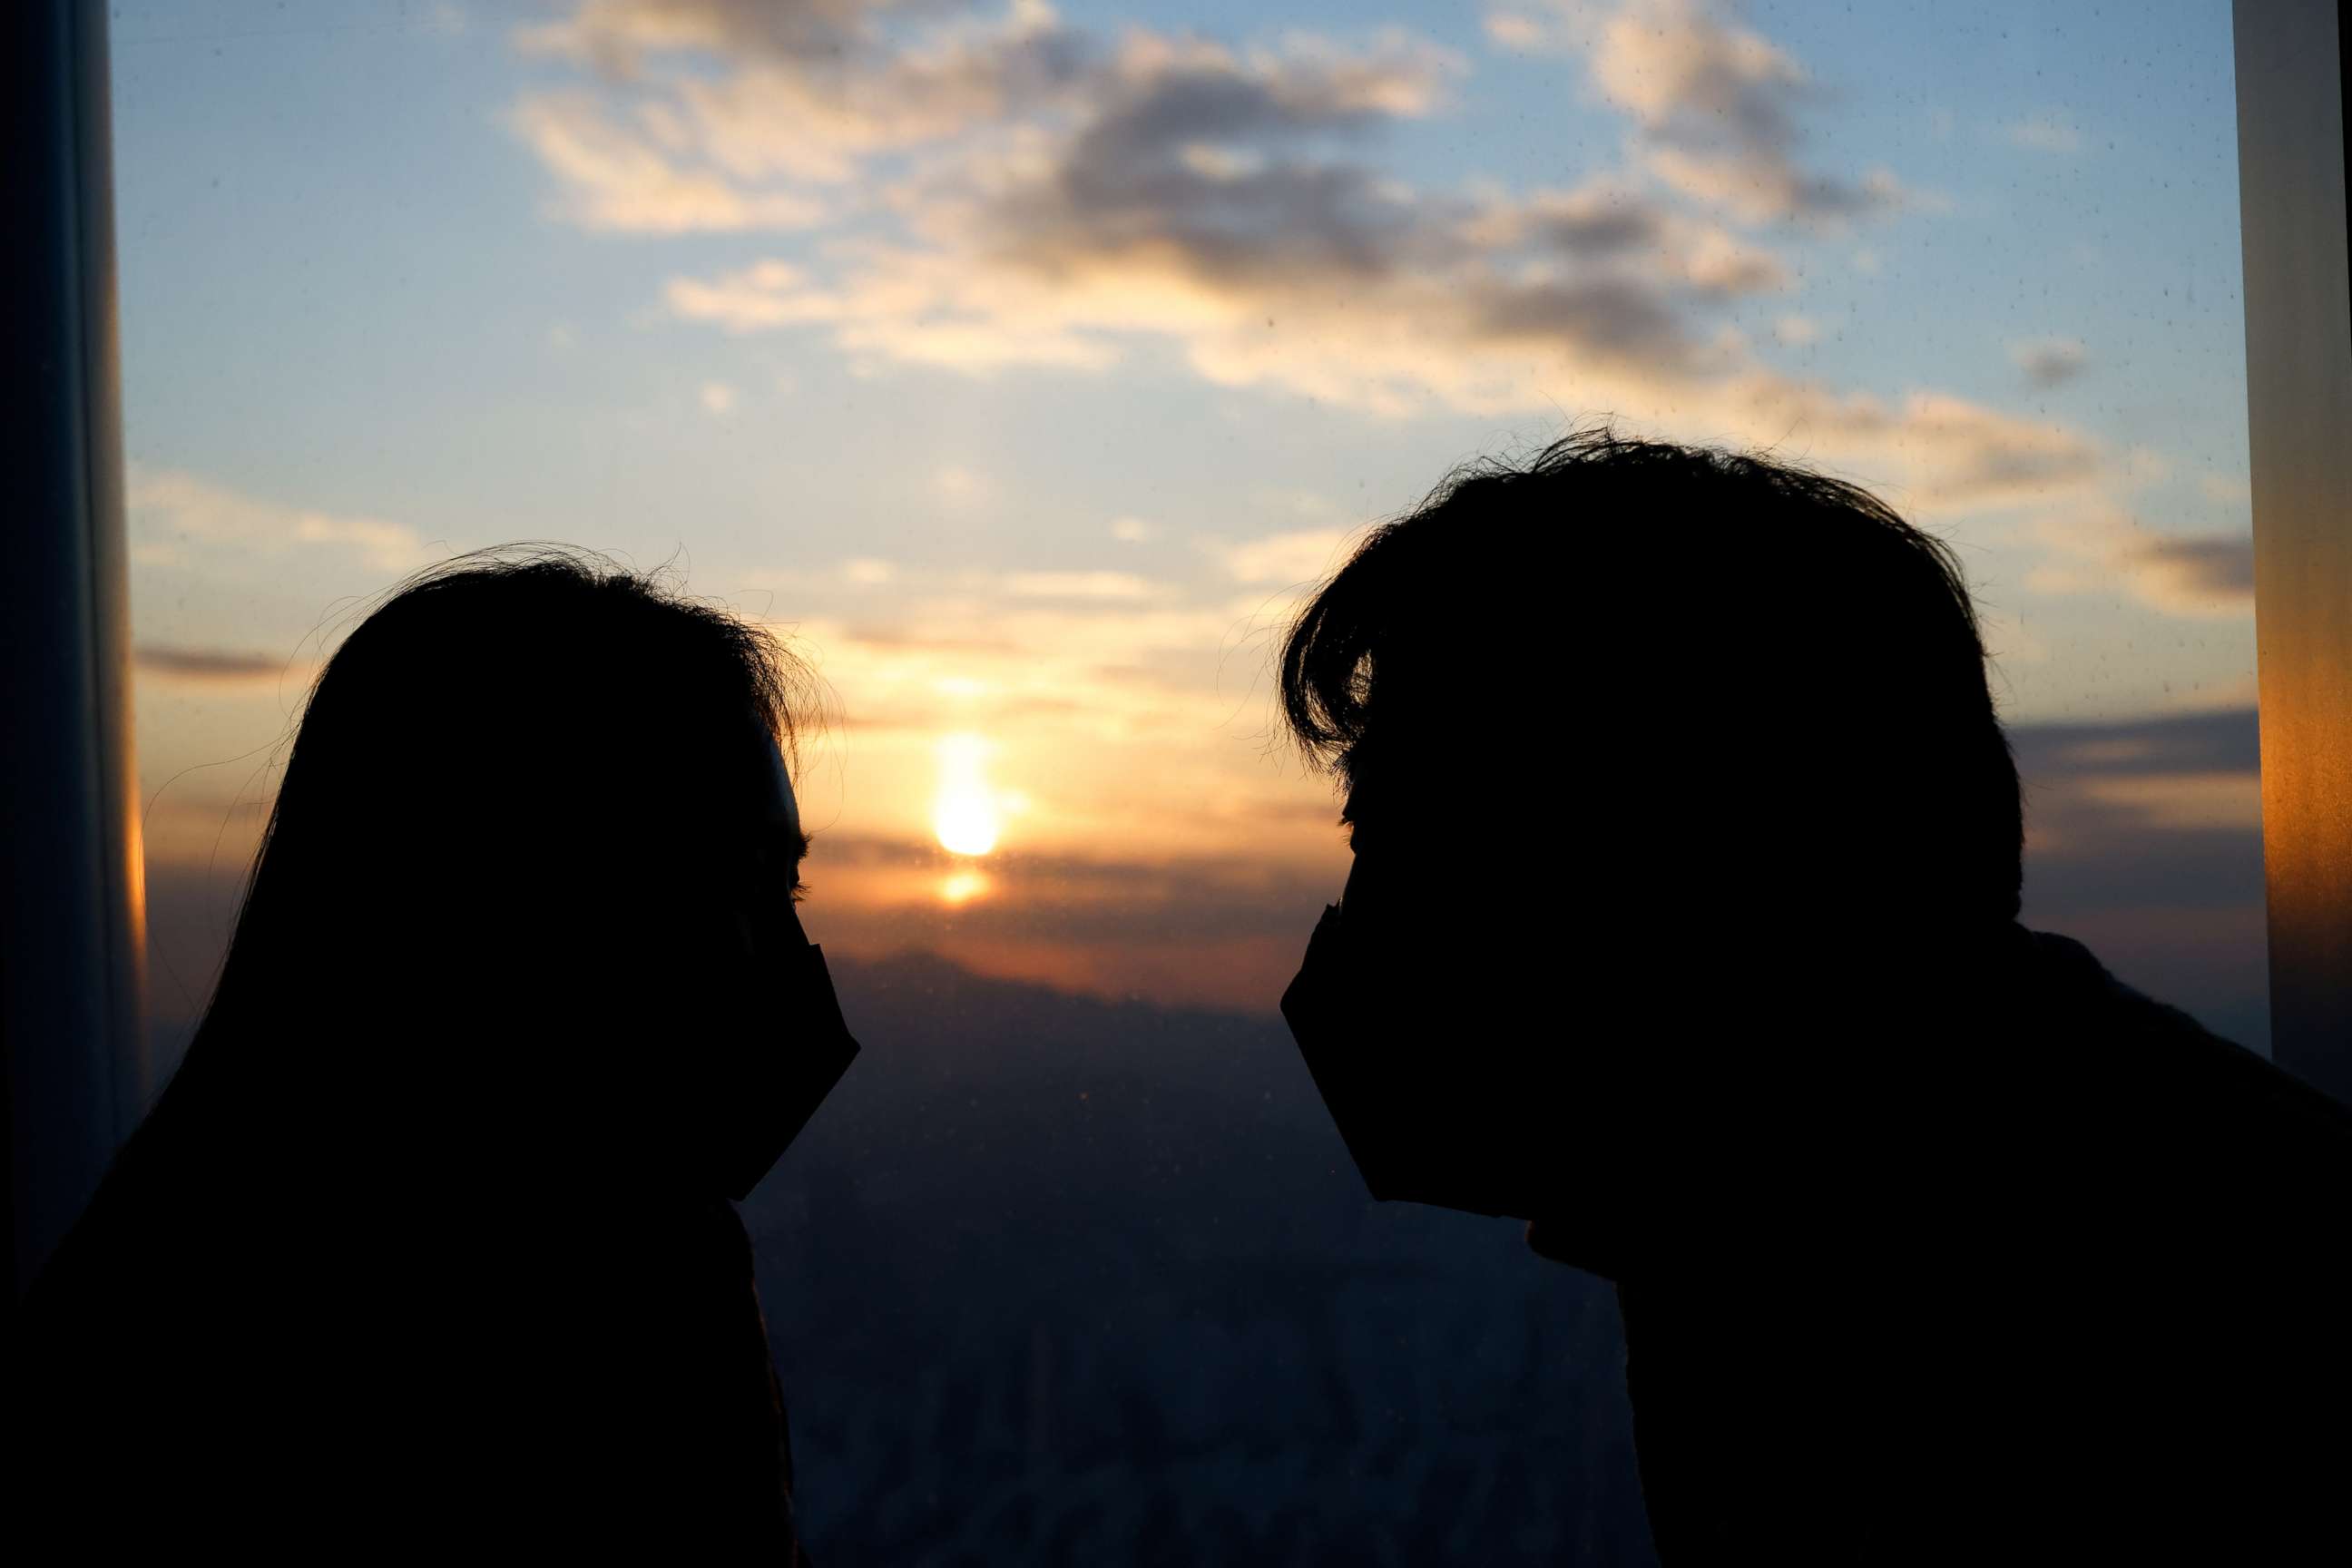 PHOTO: A couple looks at the setting sun from the Seoul Sky Observatory in Seoul, South Korea, on Dec. 31, 2020.